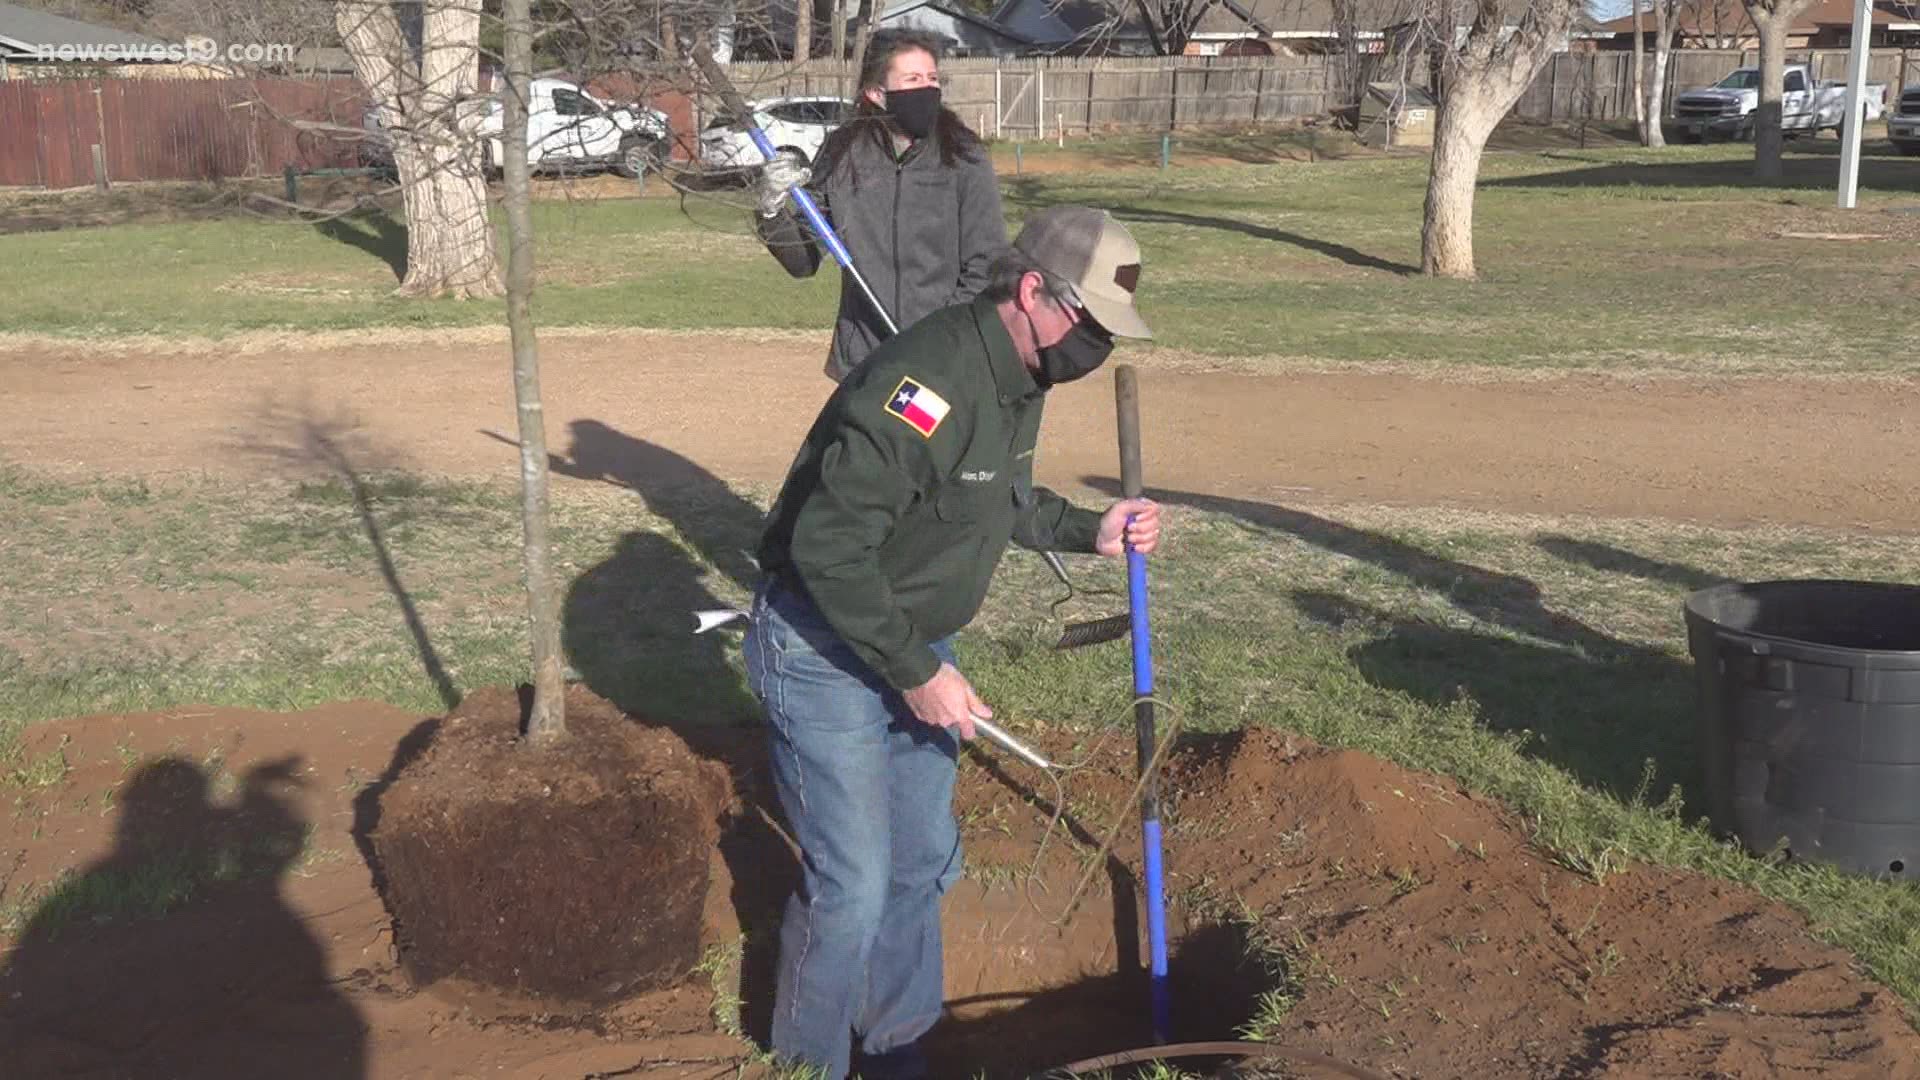 Keep Midland Beautiful, Diamondback Energy, and the City of Midland teamed up to plant trees at Sidwell Park.